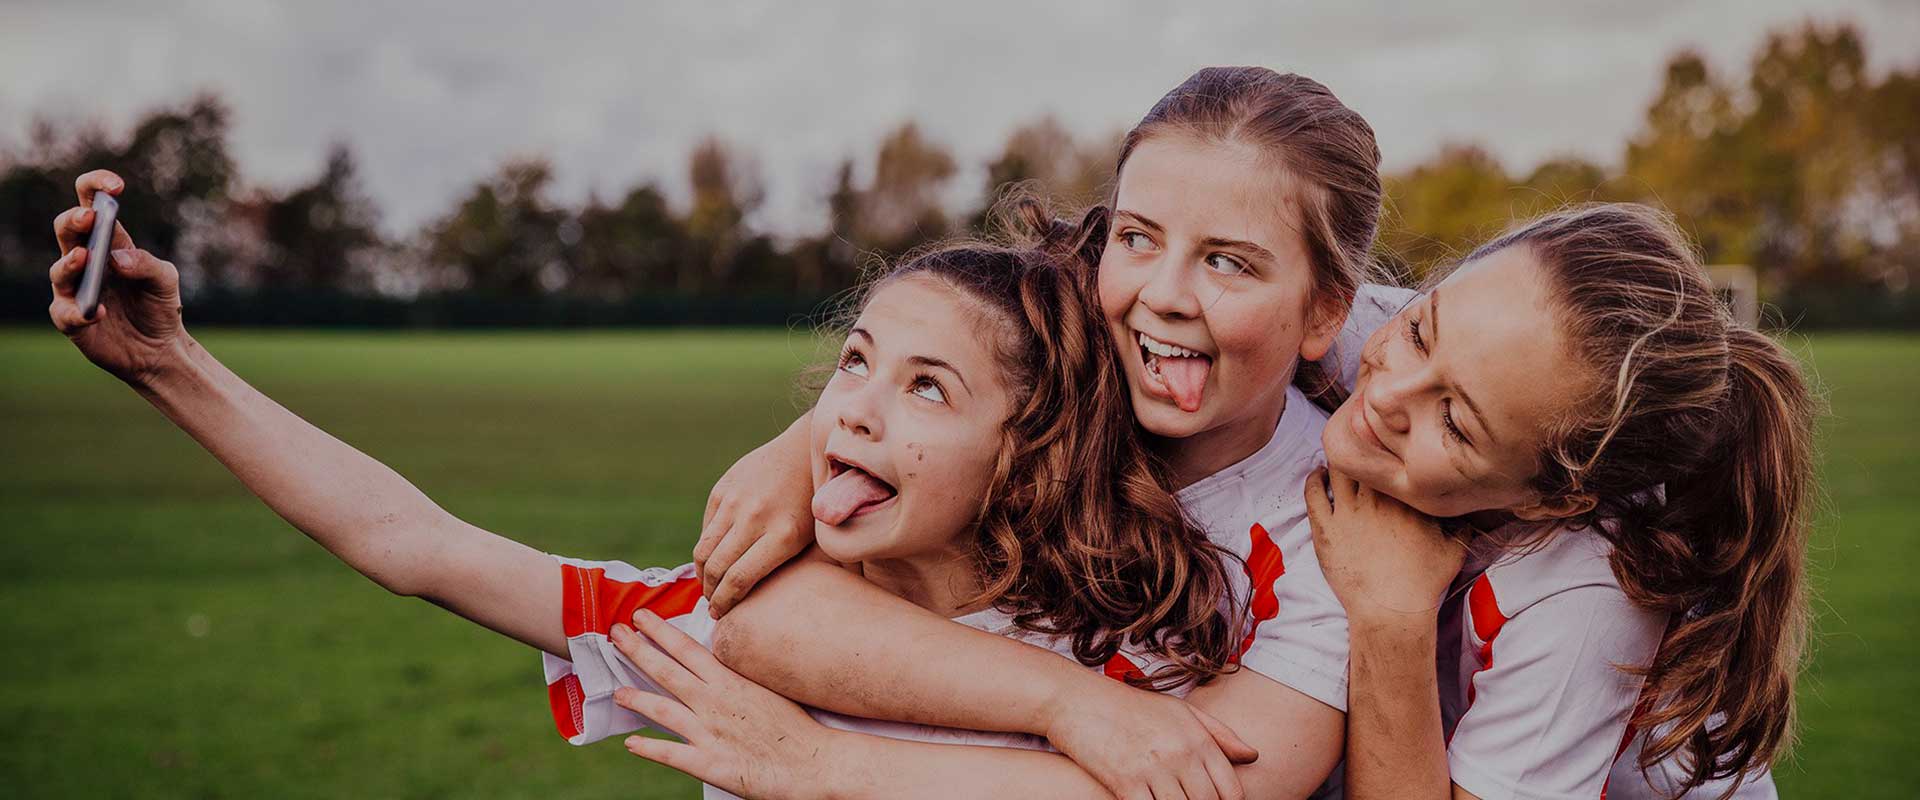 site blog api - three young girls taking a selfie after a game of fotball